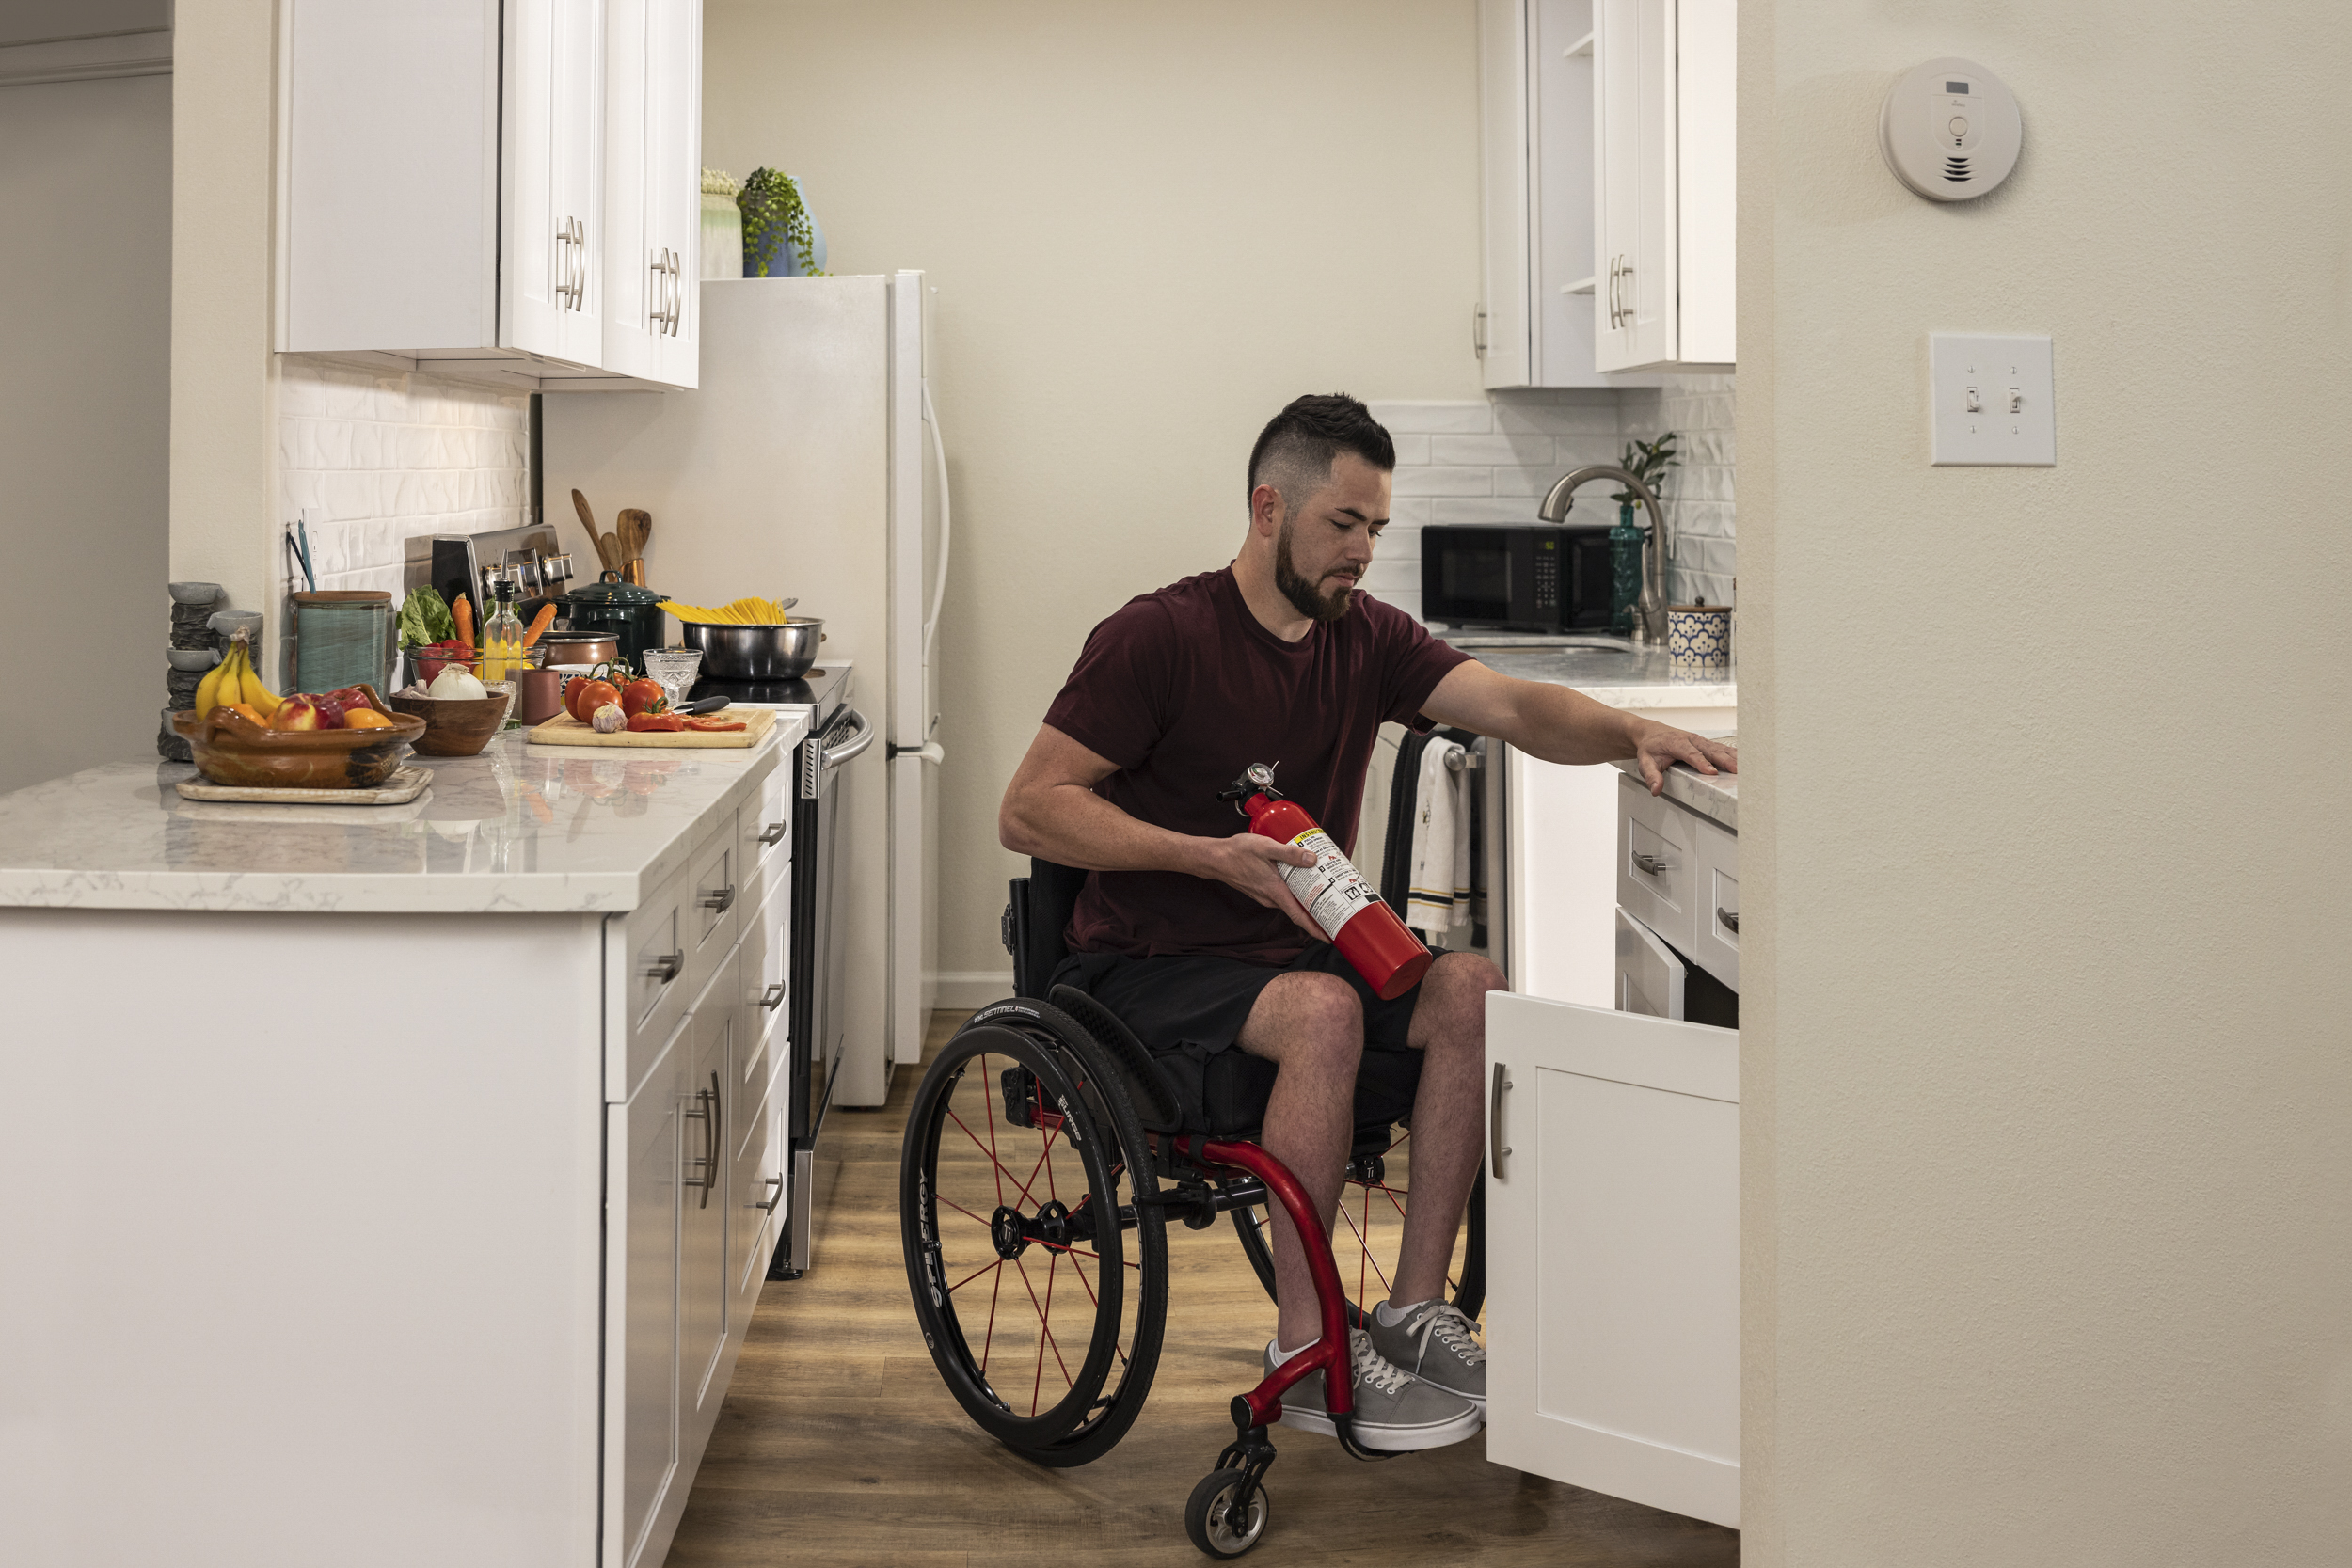 Fire Safety - person who uses a wheelchair putting a fire extinguisher in their kitchen.